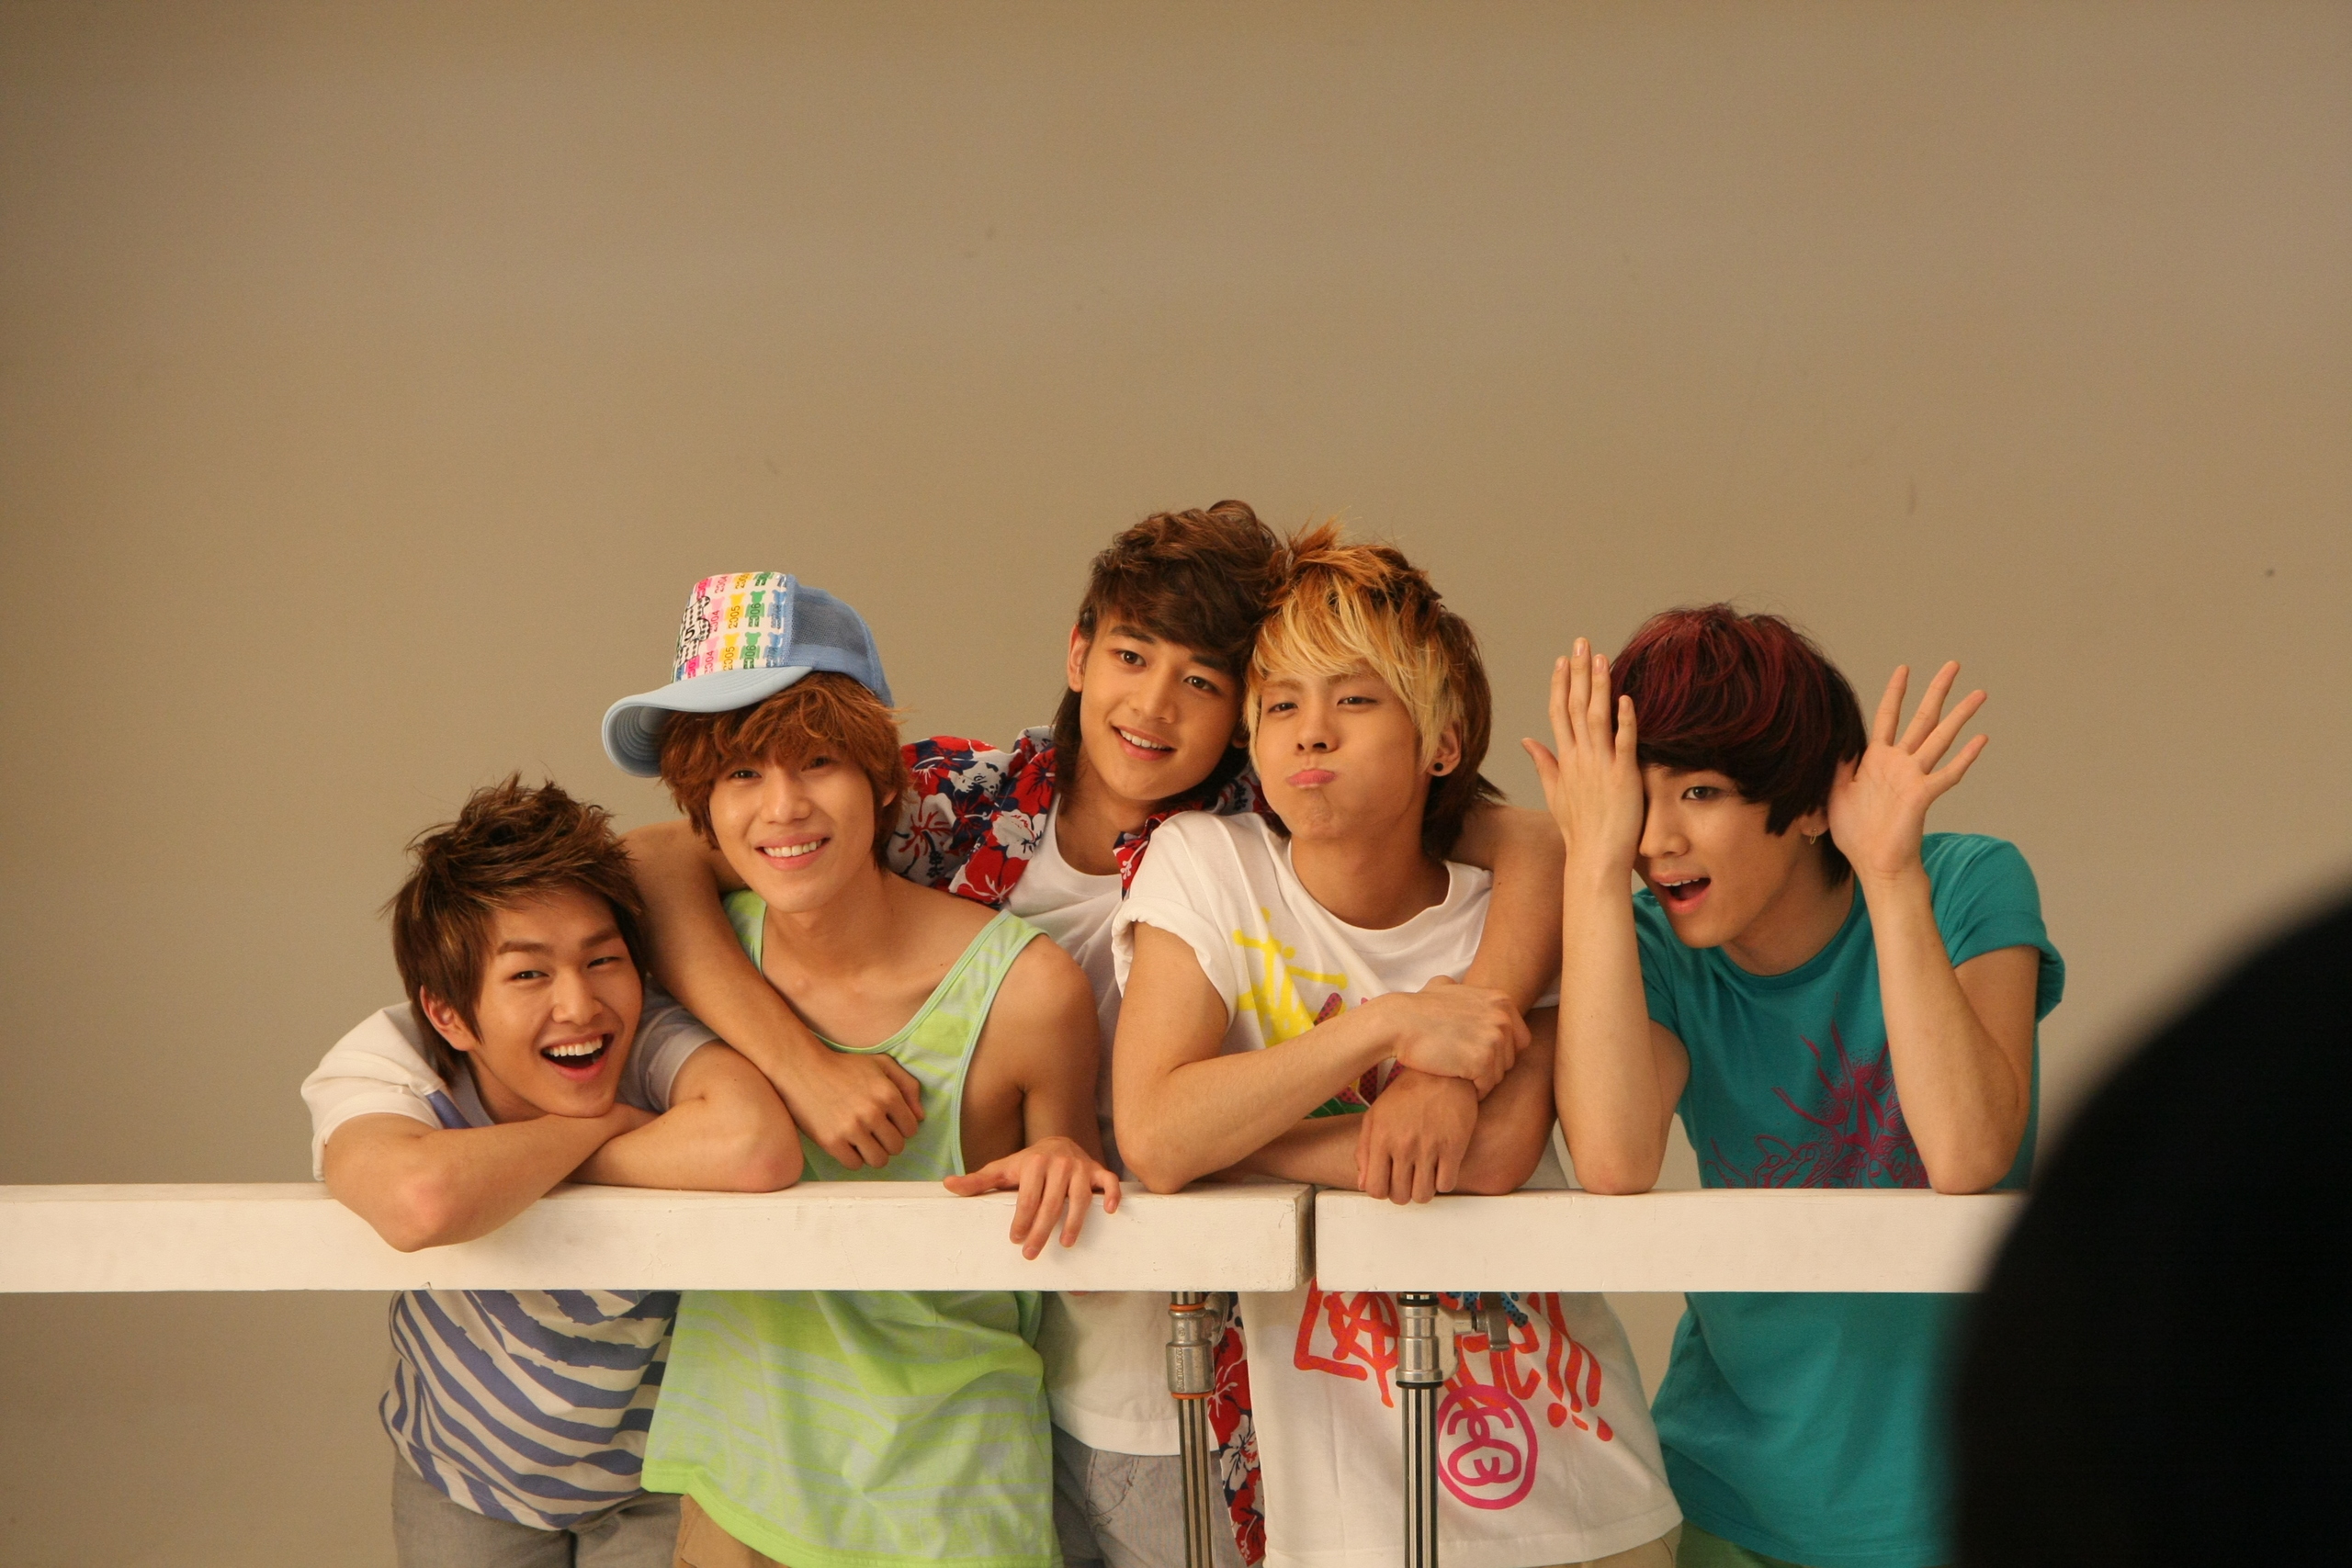 Shinee Image Large HD Pics Wallpaper And Background Photos